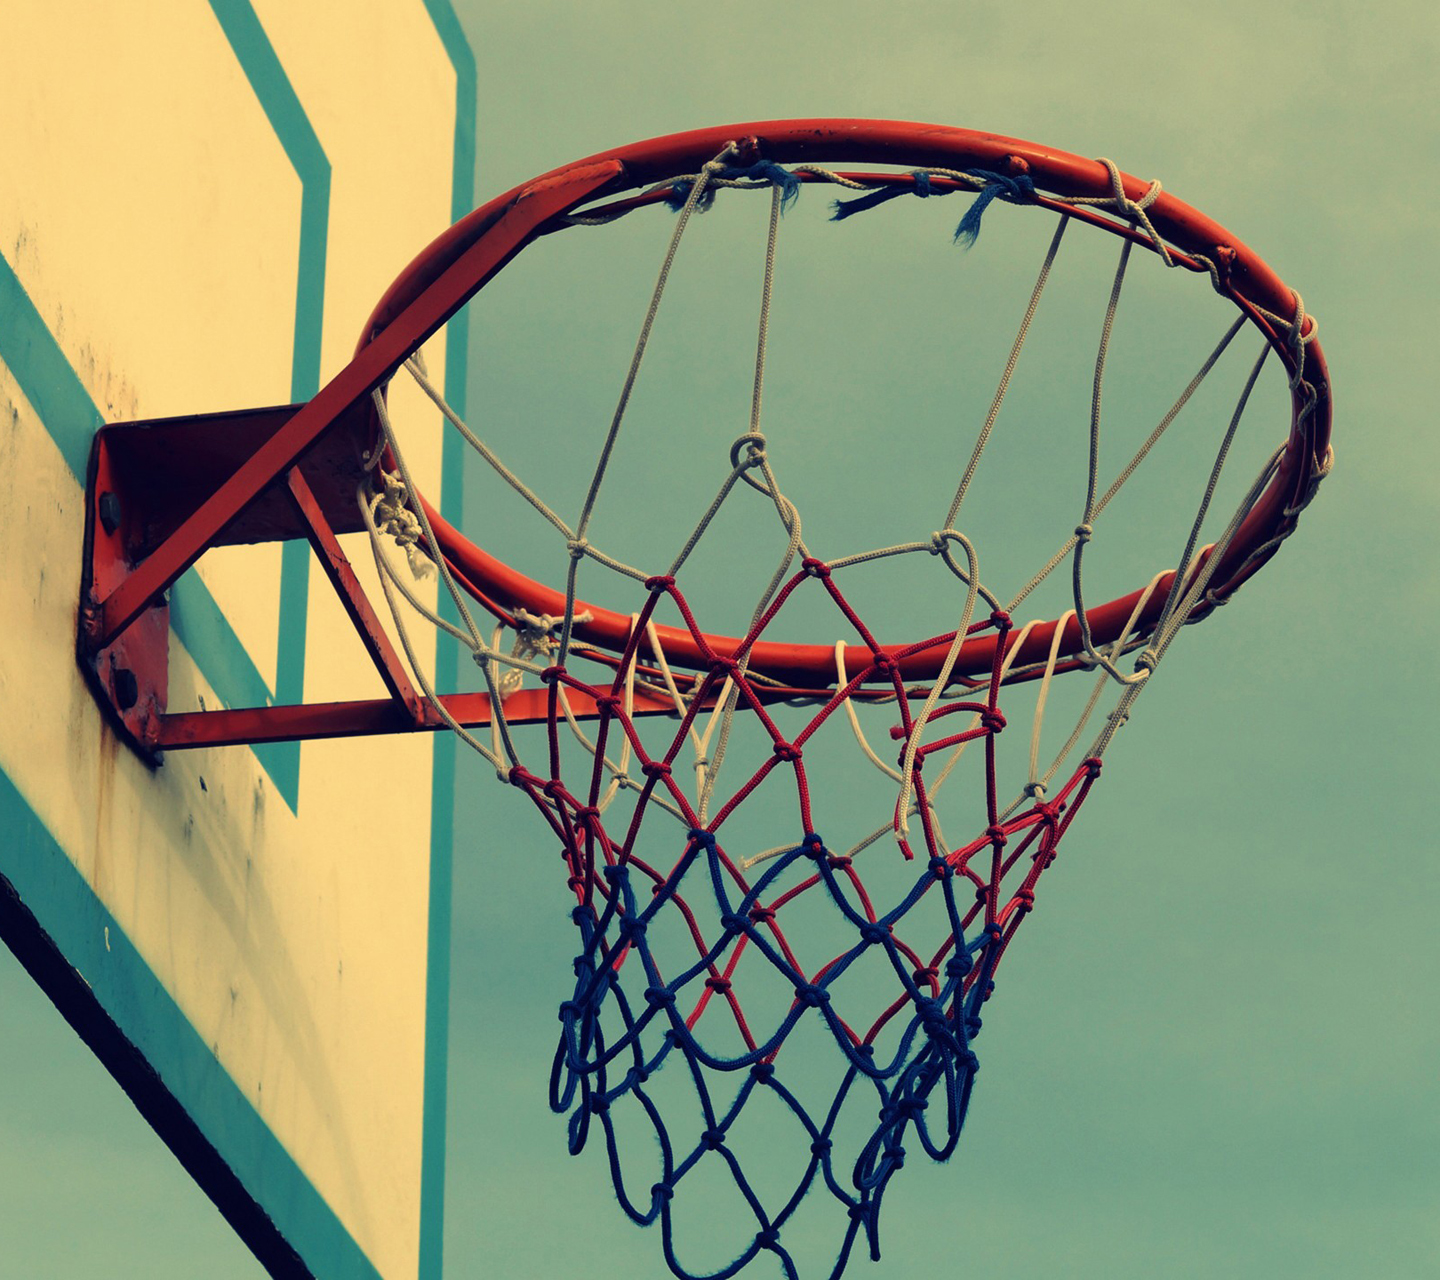 Galaxy S3 Wallpaper - Basketball - HD Wallpapers - 9to5Backgrounds